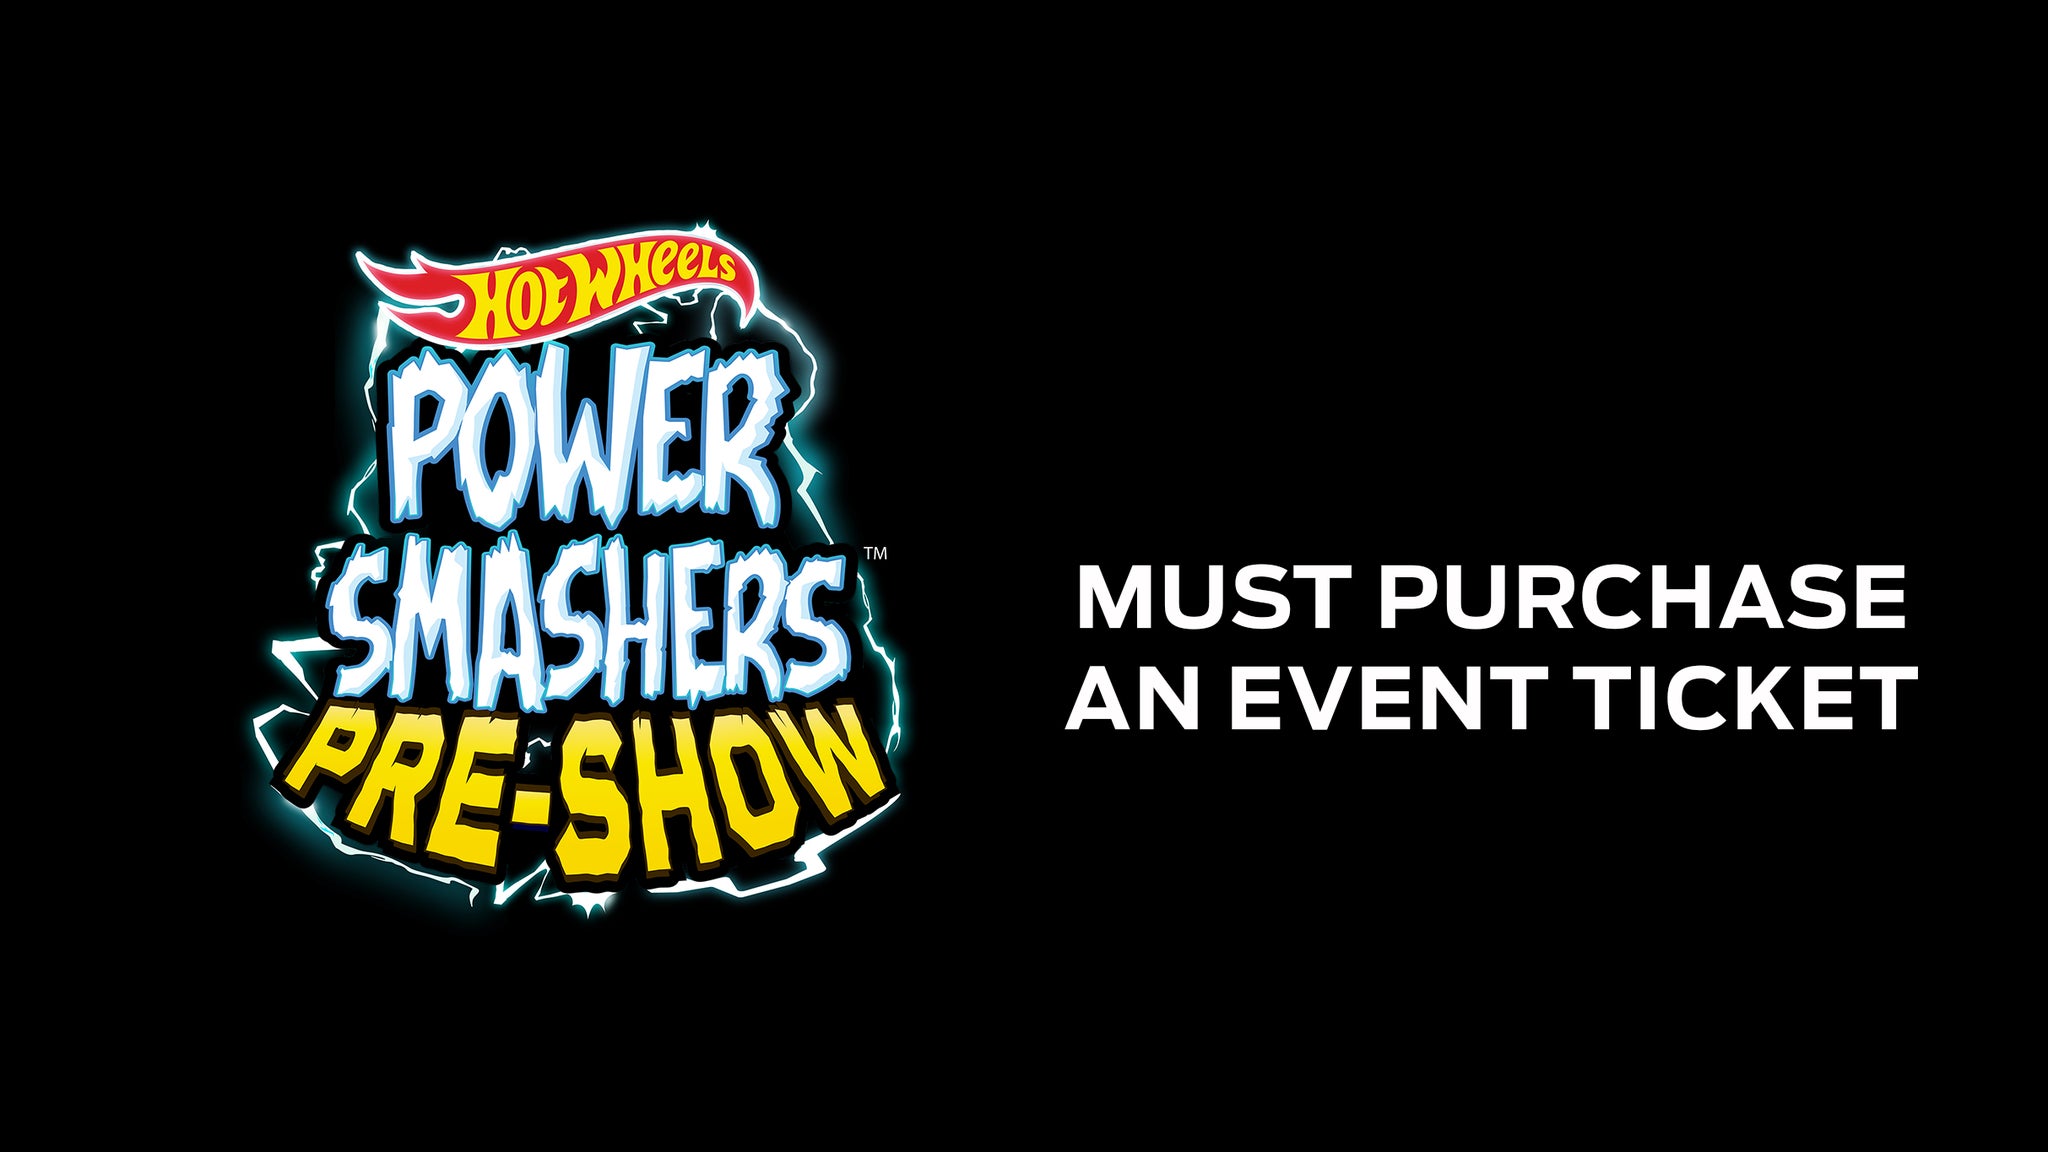 Hot Wheels Power Smashers Pre-Show (10:00AM to 11:15AM)